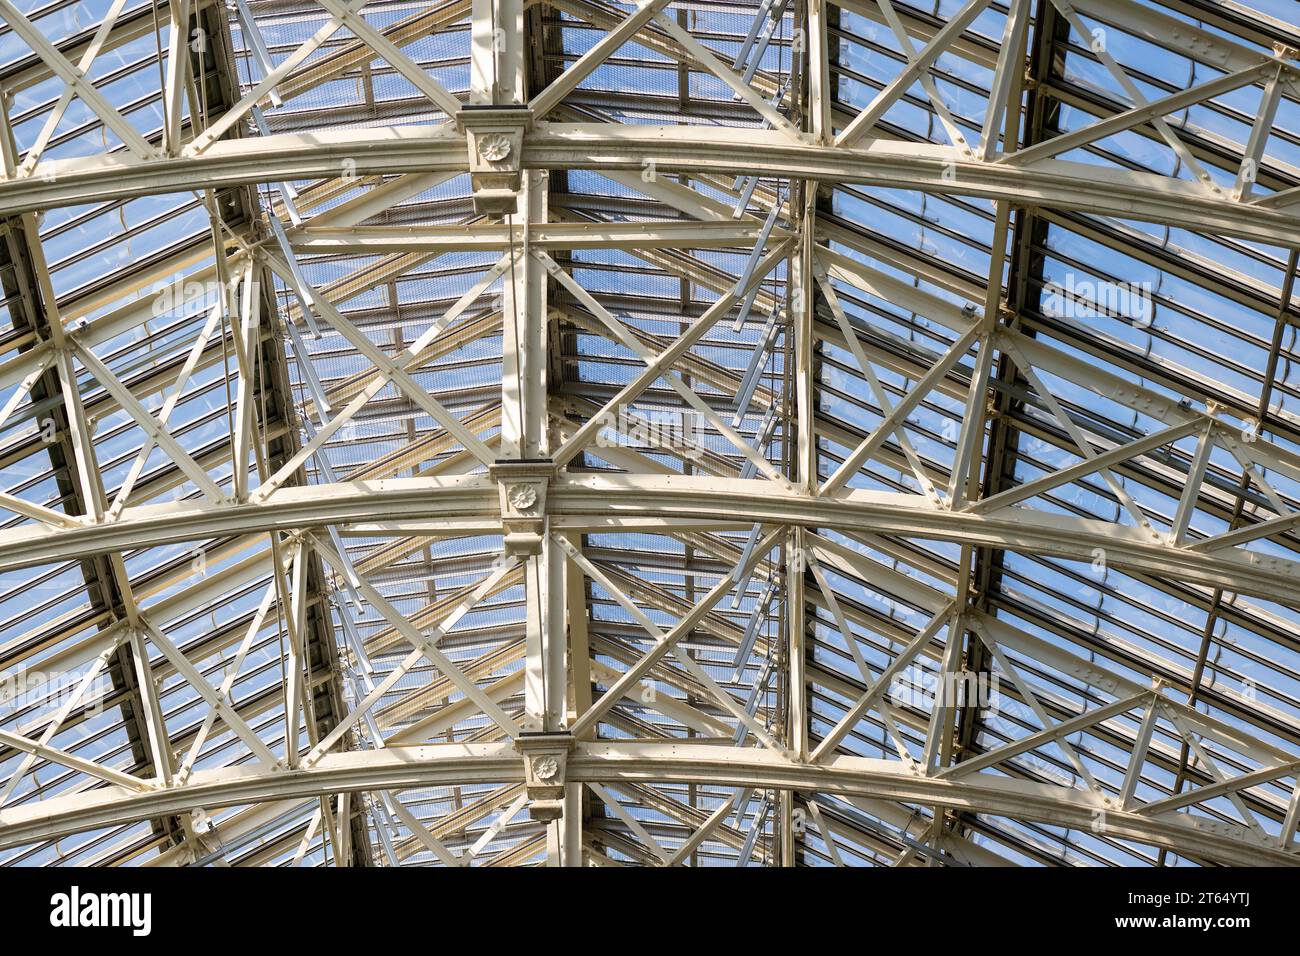 Roof construction, Temperate House, largest Victorian greenhouse in the world, Royal Botanic Gardens (Kew Gardens), UNESCO World Heritage Site, Kew Stock Photo